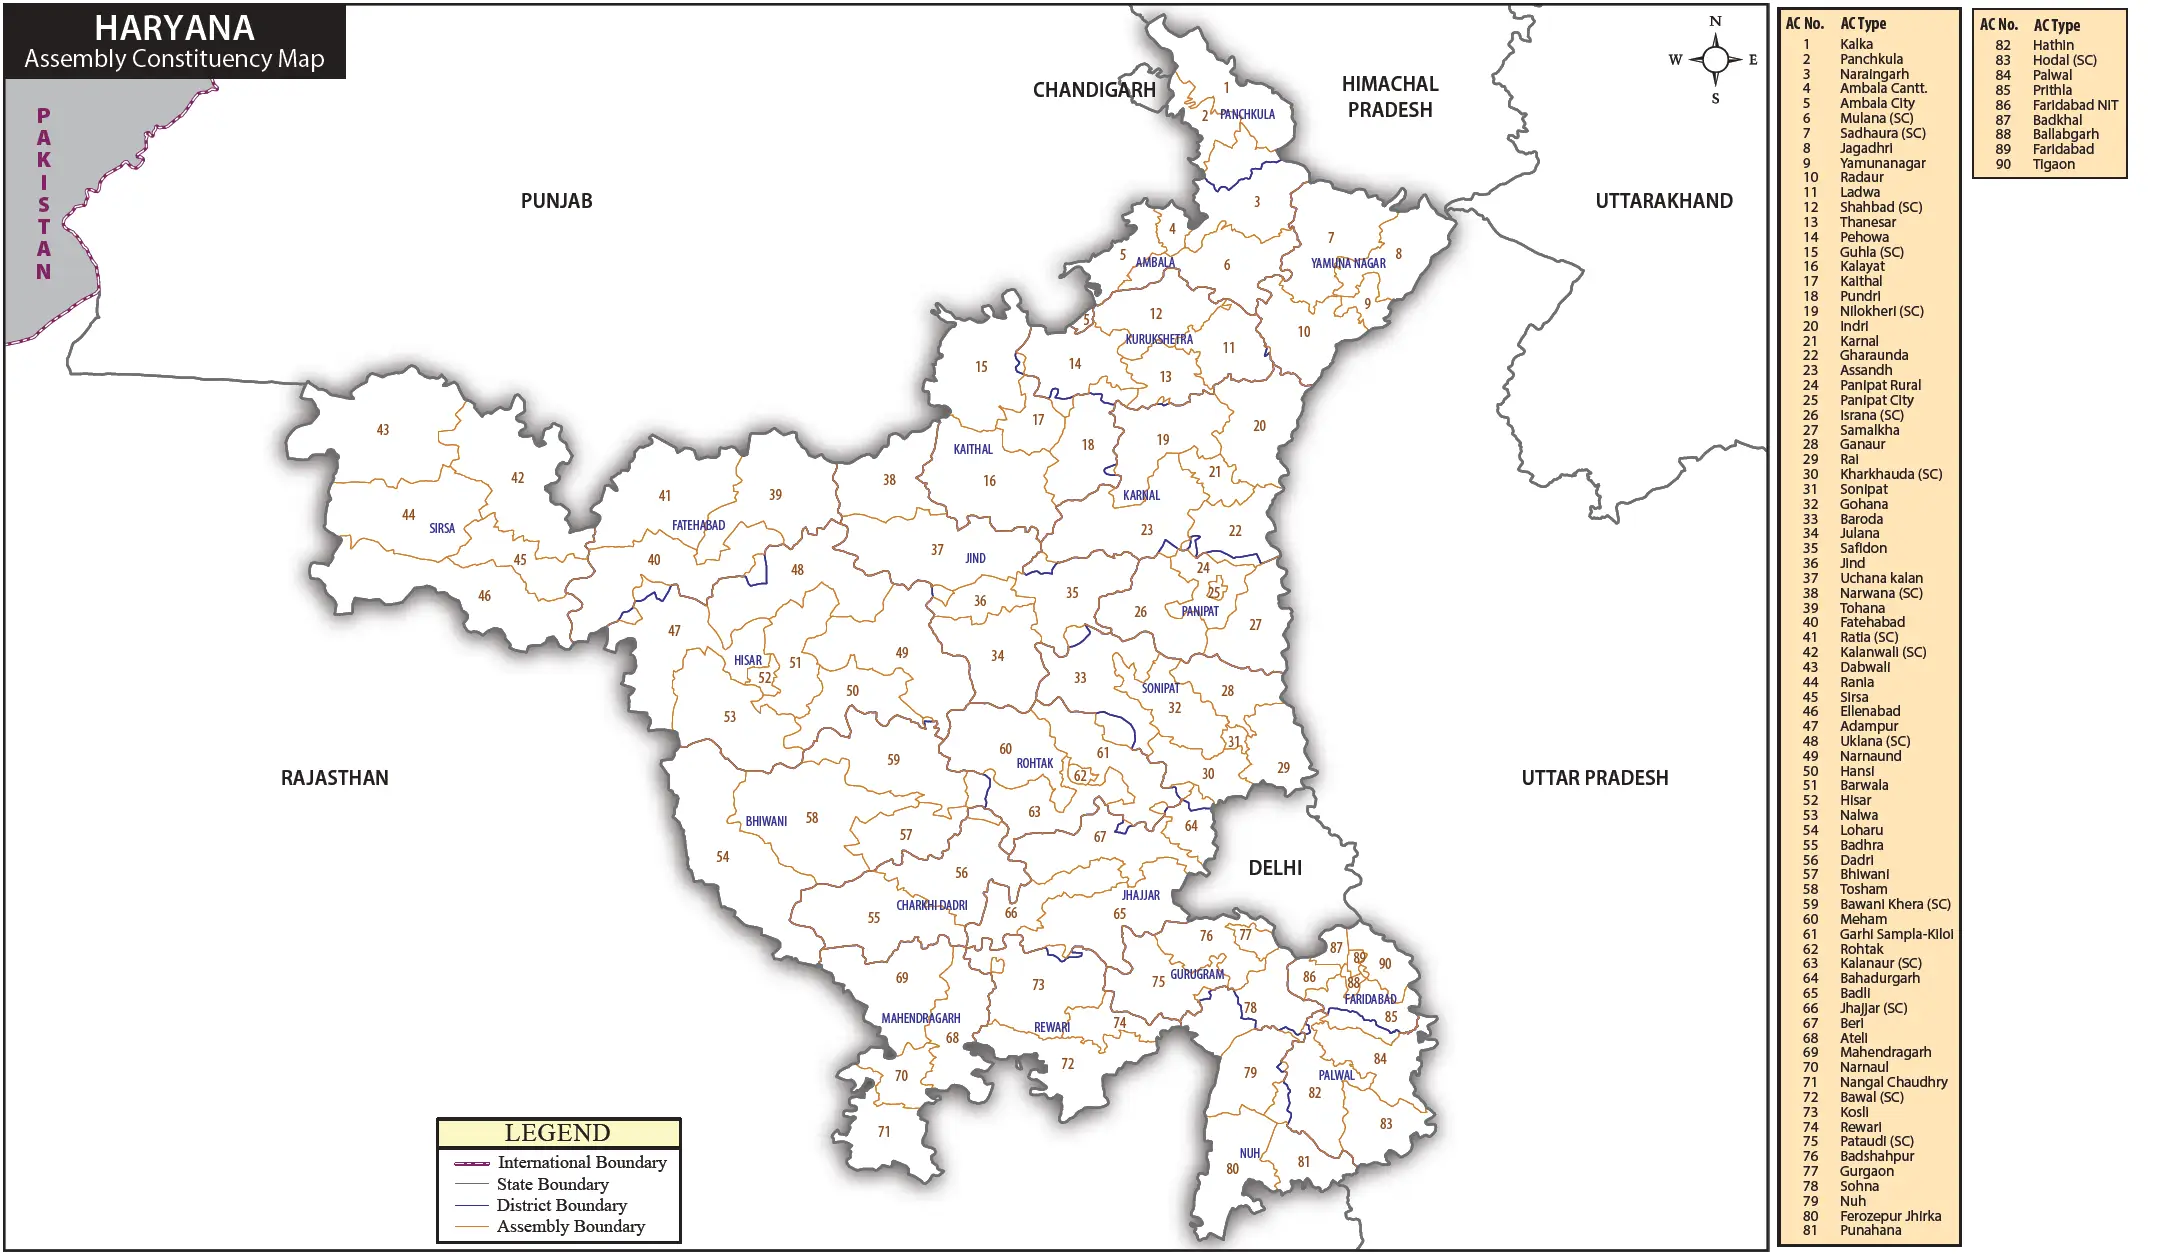 Haryana Assembly Constituency Map